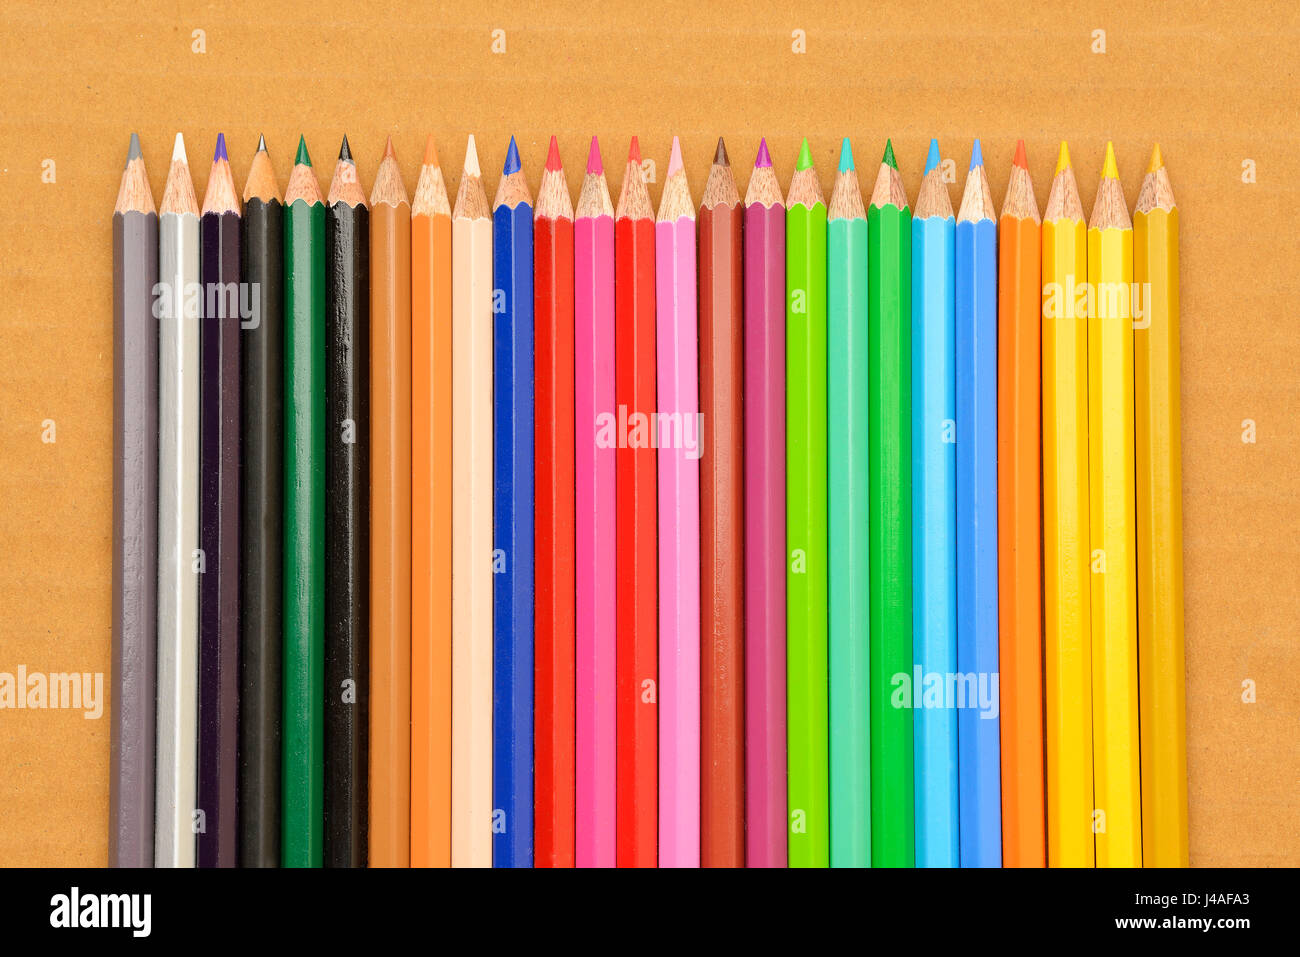 Top View of Colored Pencils Stock Photo